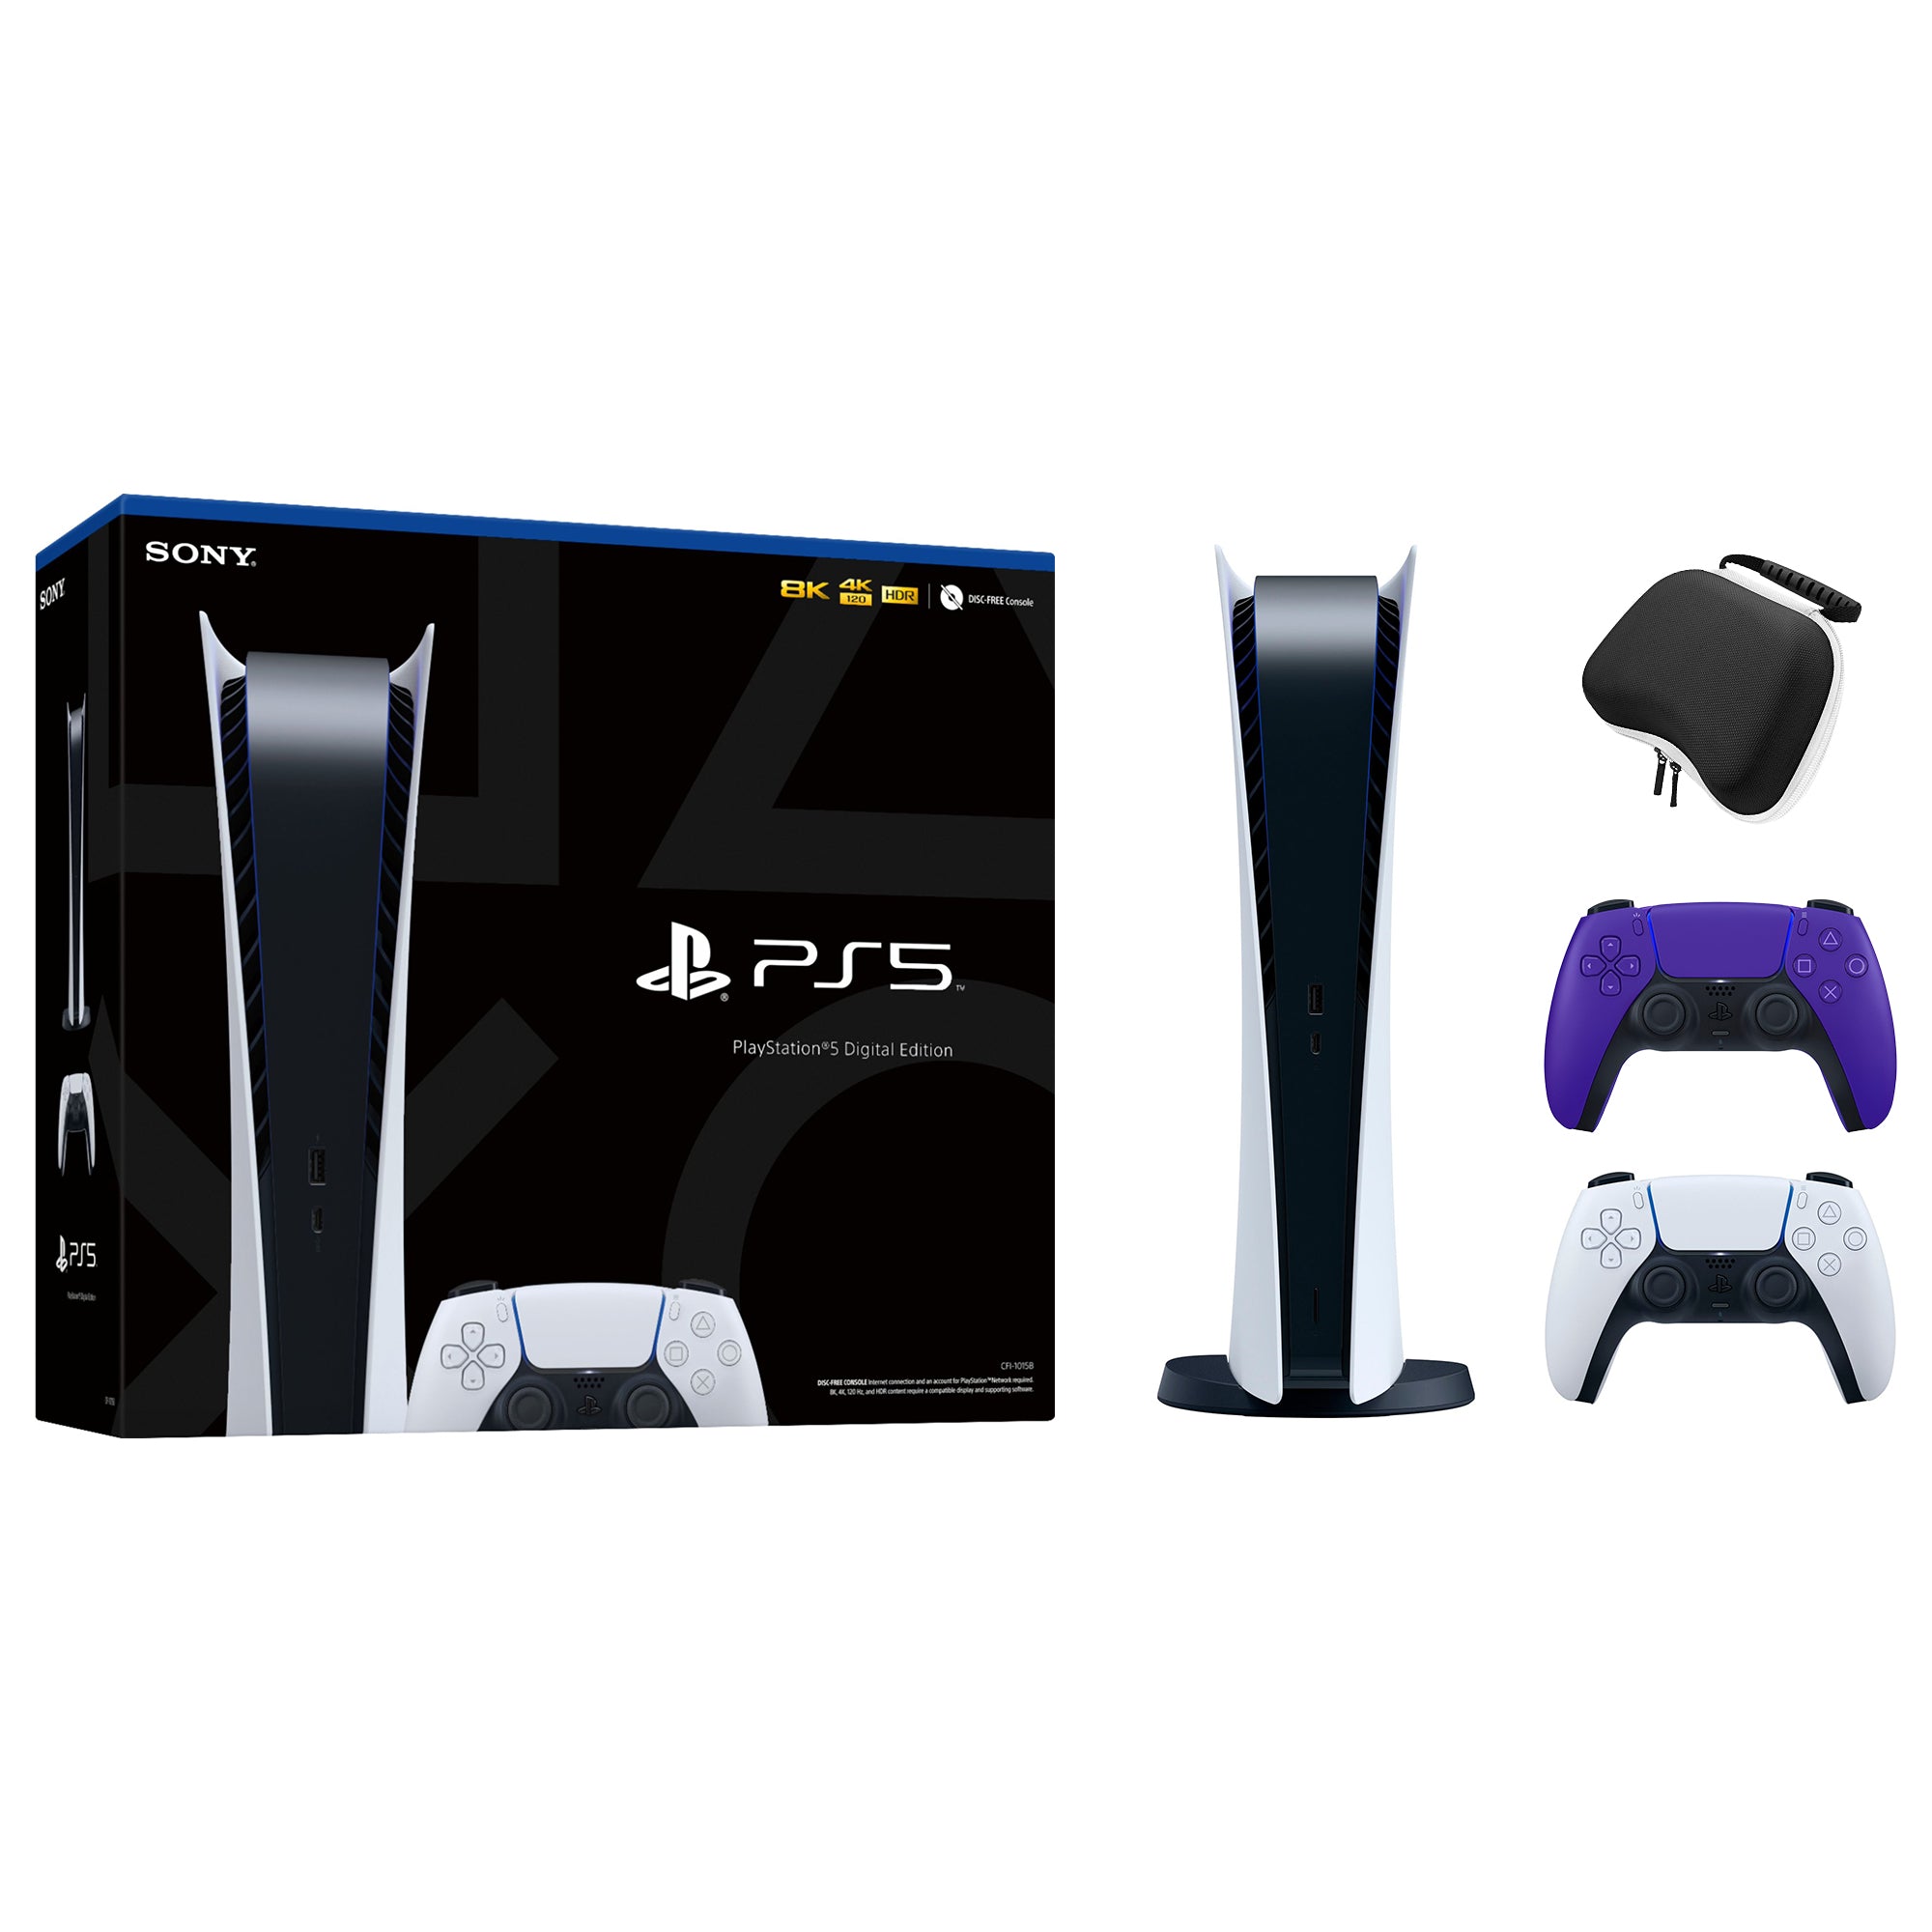 PlayStation 5 Digital Edition with Two Controllers White and Galactic Purple DualSense and Mytrix Hard Shell Protective Controller Case - PS5 Gaming Console